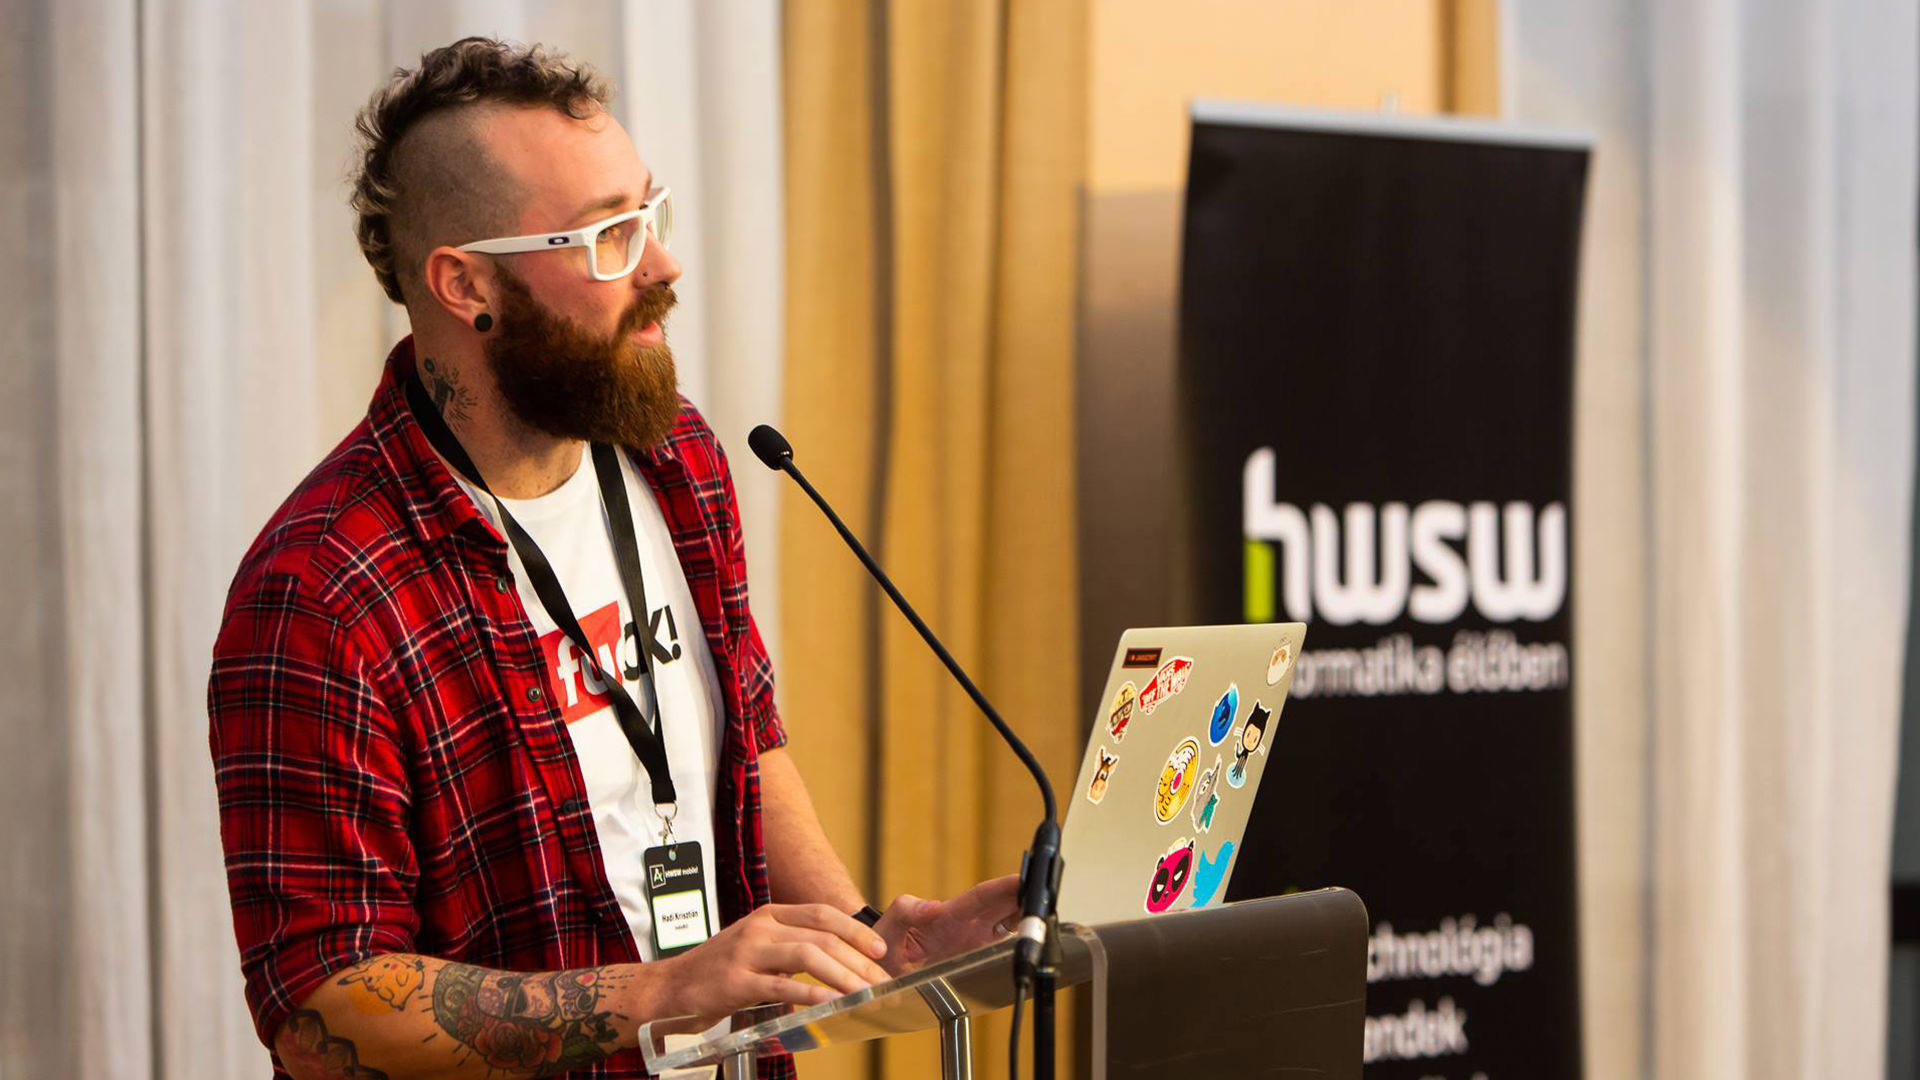 Me at HWSW Mobile Conf 2018